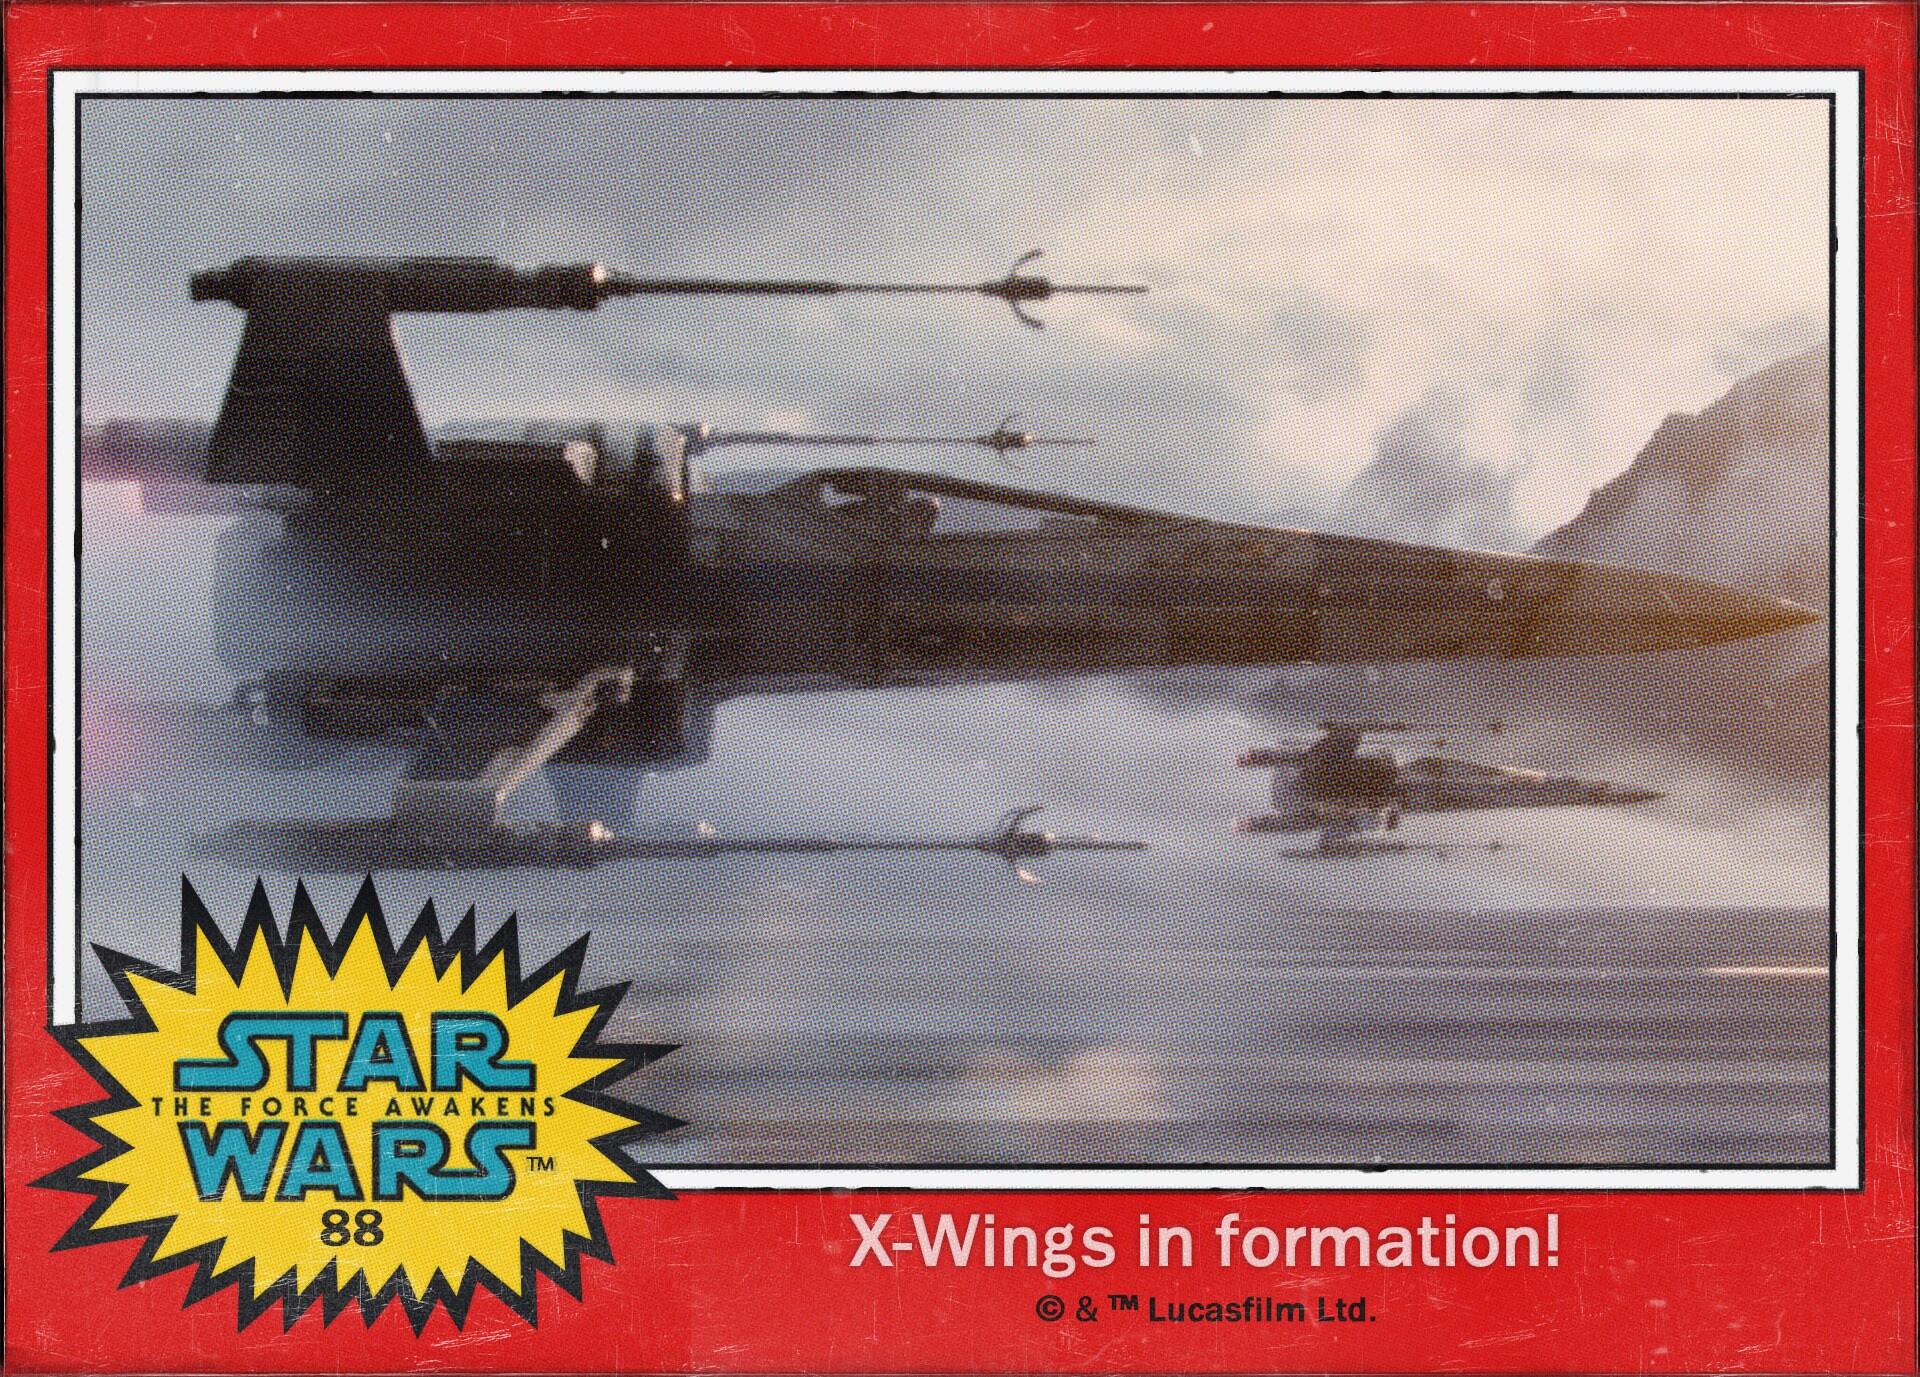 X-wings in formation! Star Wars: The Force Awakens Digital Trading Card #88